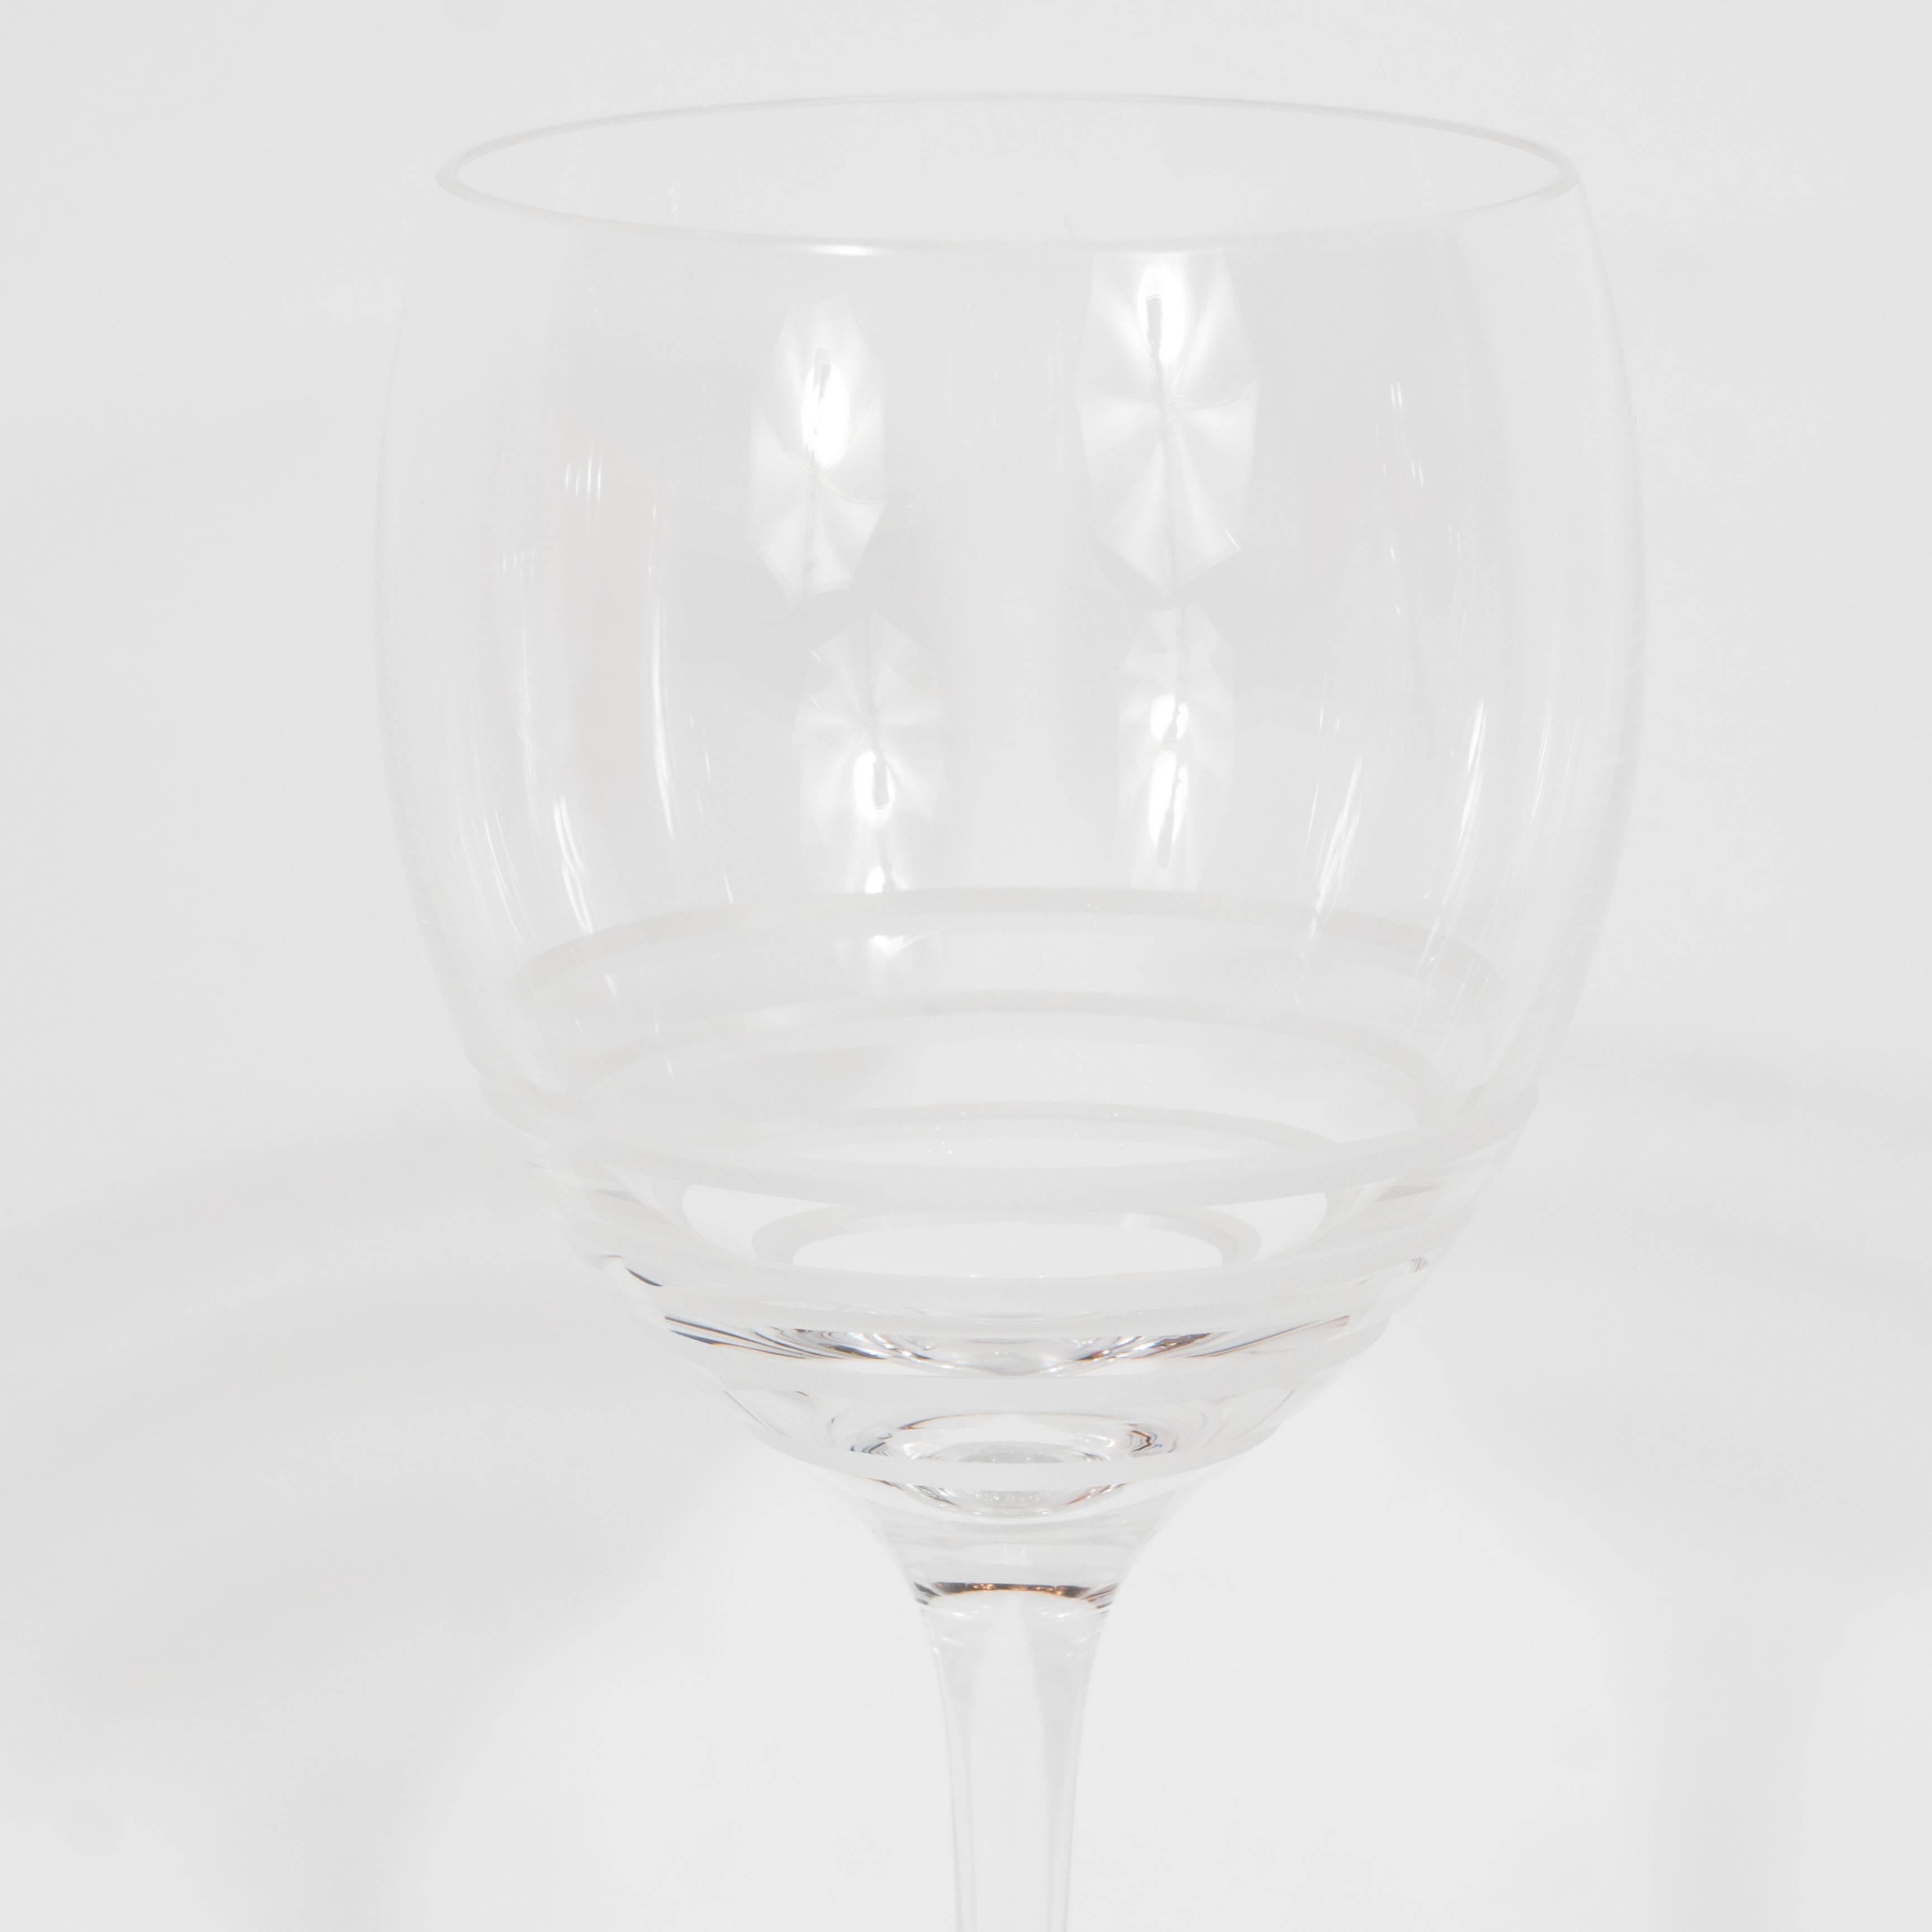 Modern Suite of 12 Red, White and Champagne Crystal Glasses by Saint-Louis for Hermes